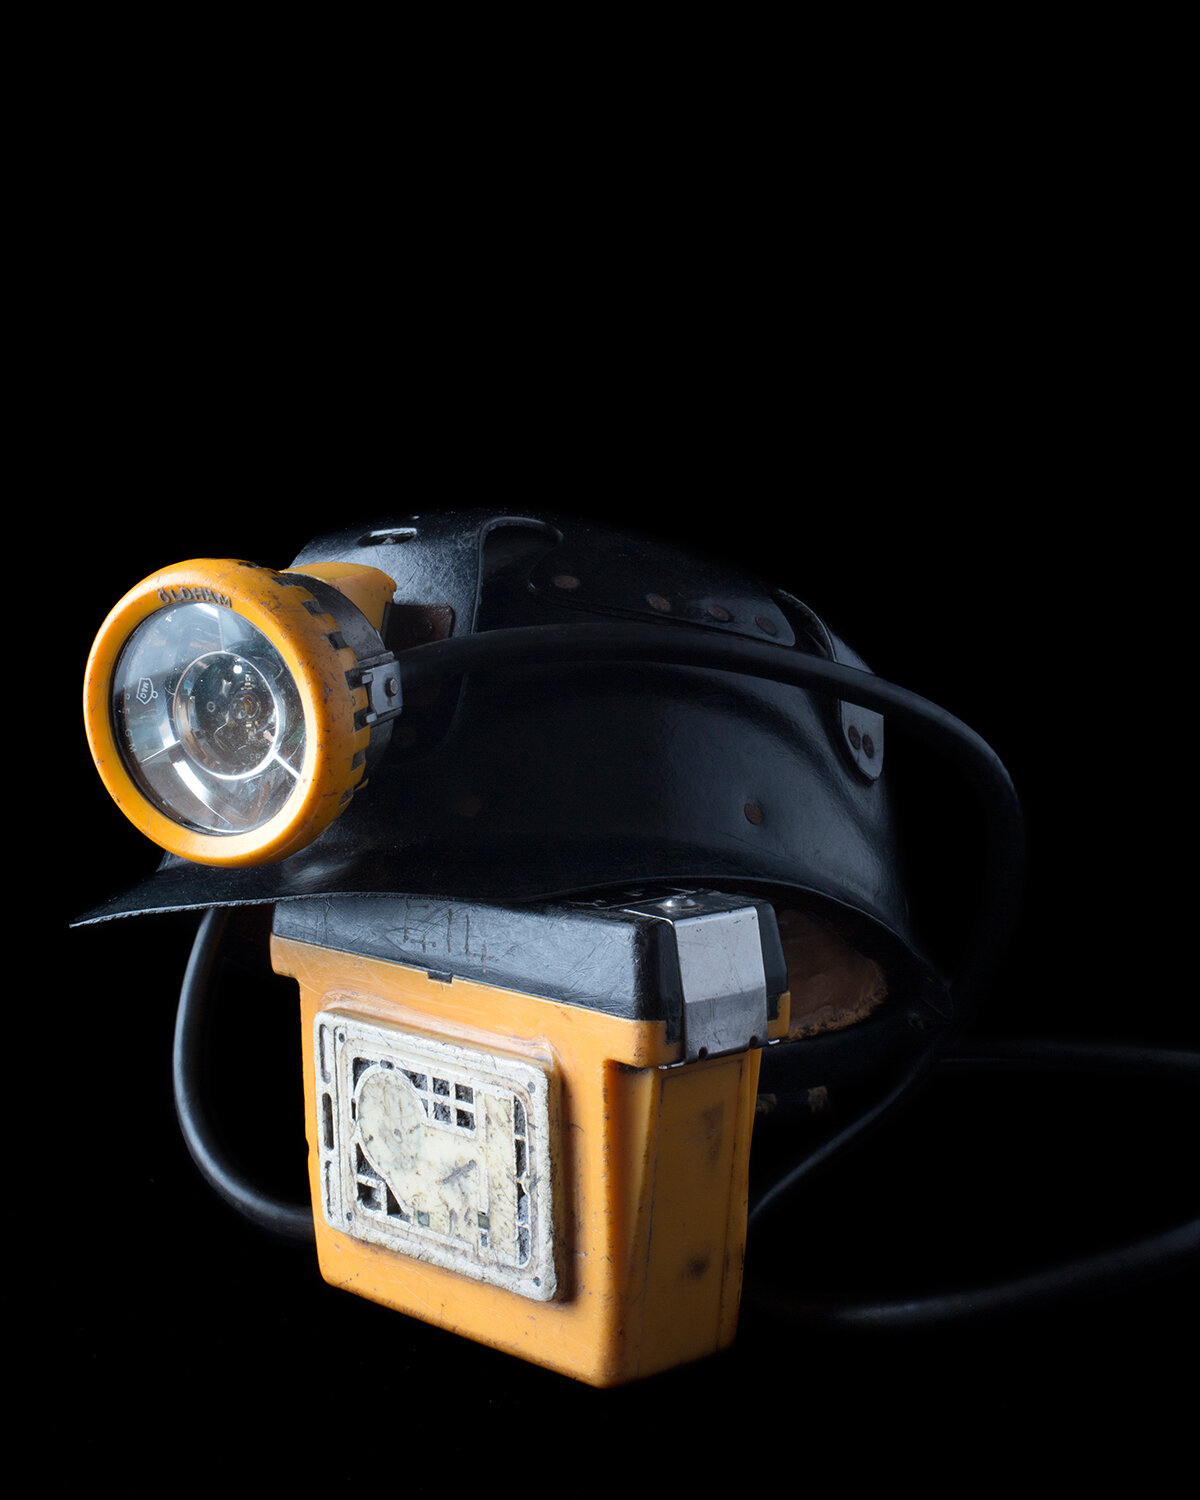 Miners helmet, cap lamp and battery pack